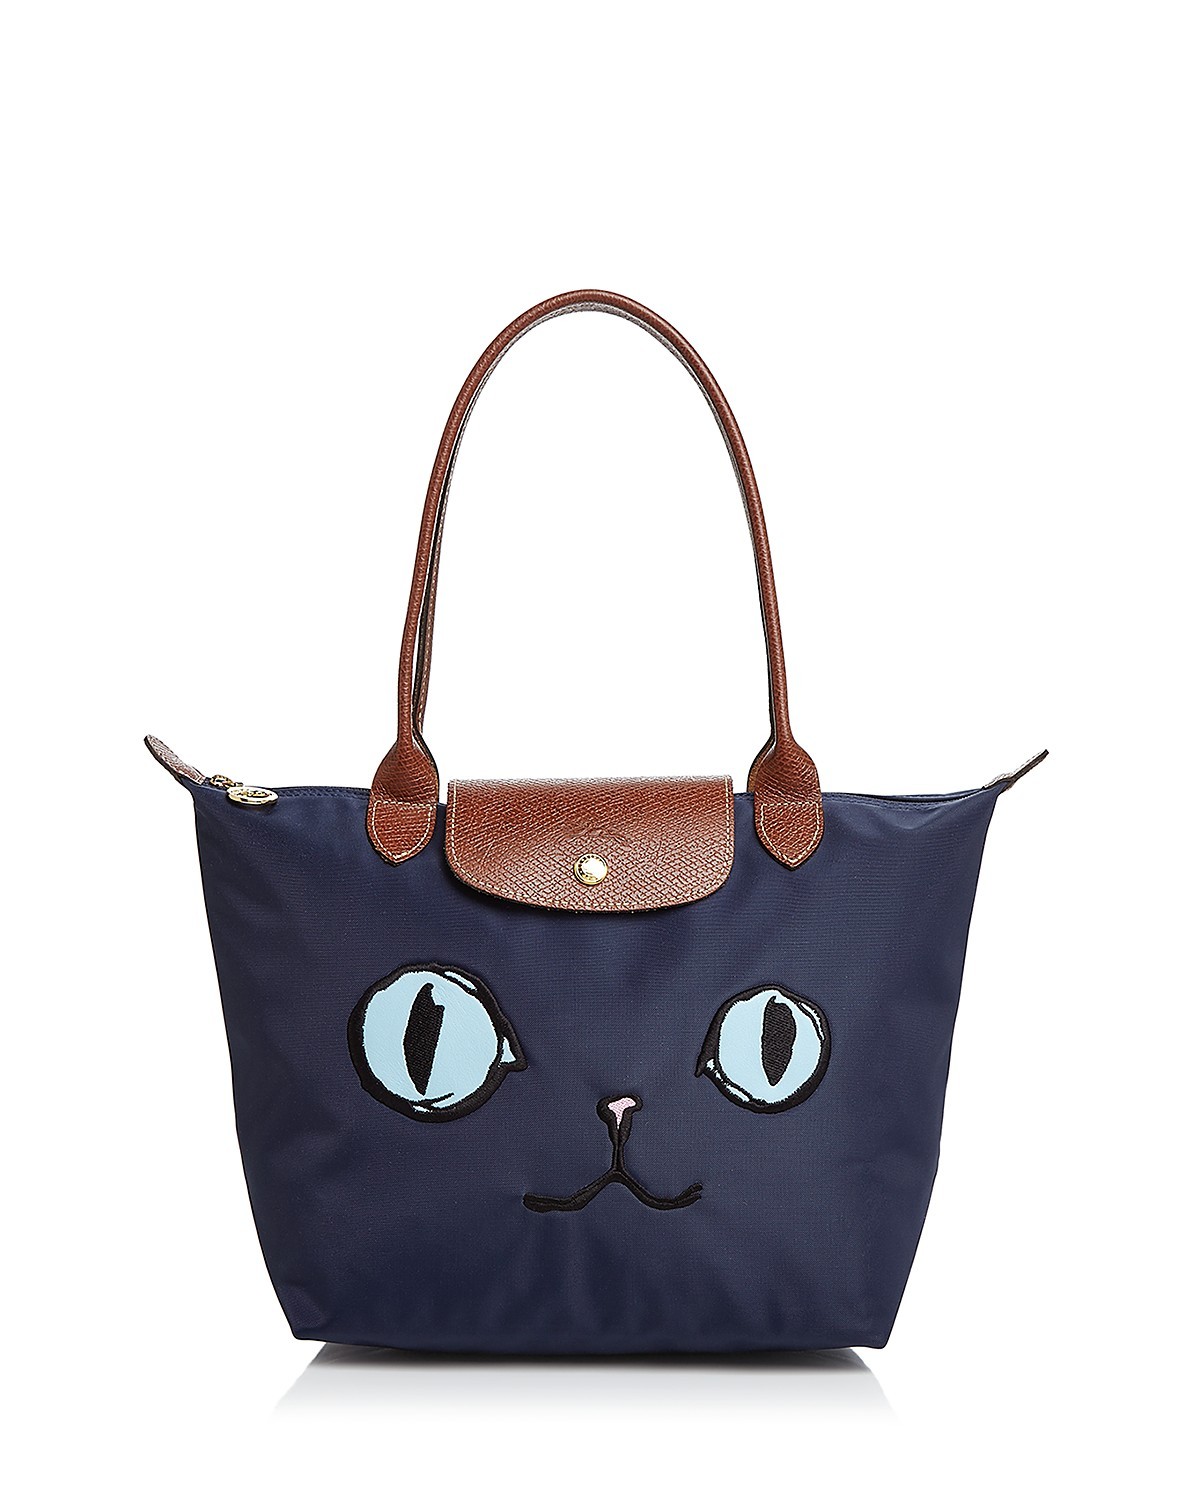 Special Offeer France Made Longchamp Miaou Cat Blue Eyes Small Tote Bag Navy - $150.00